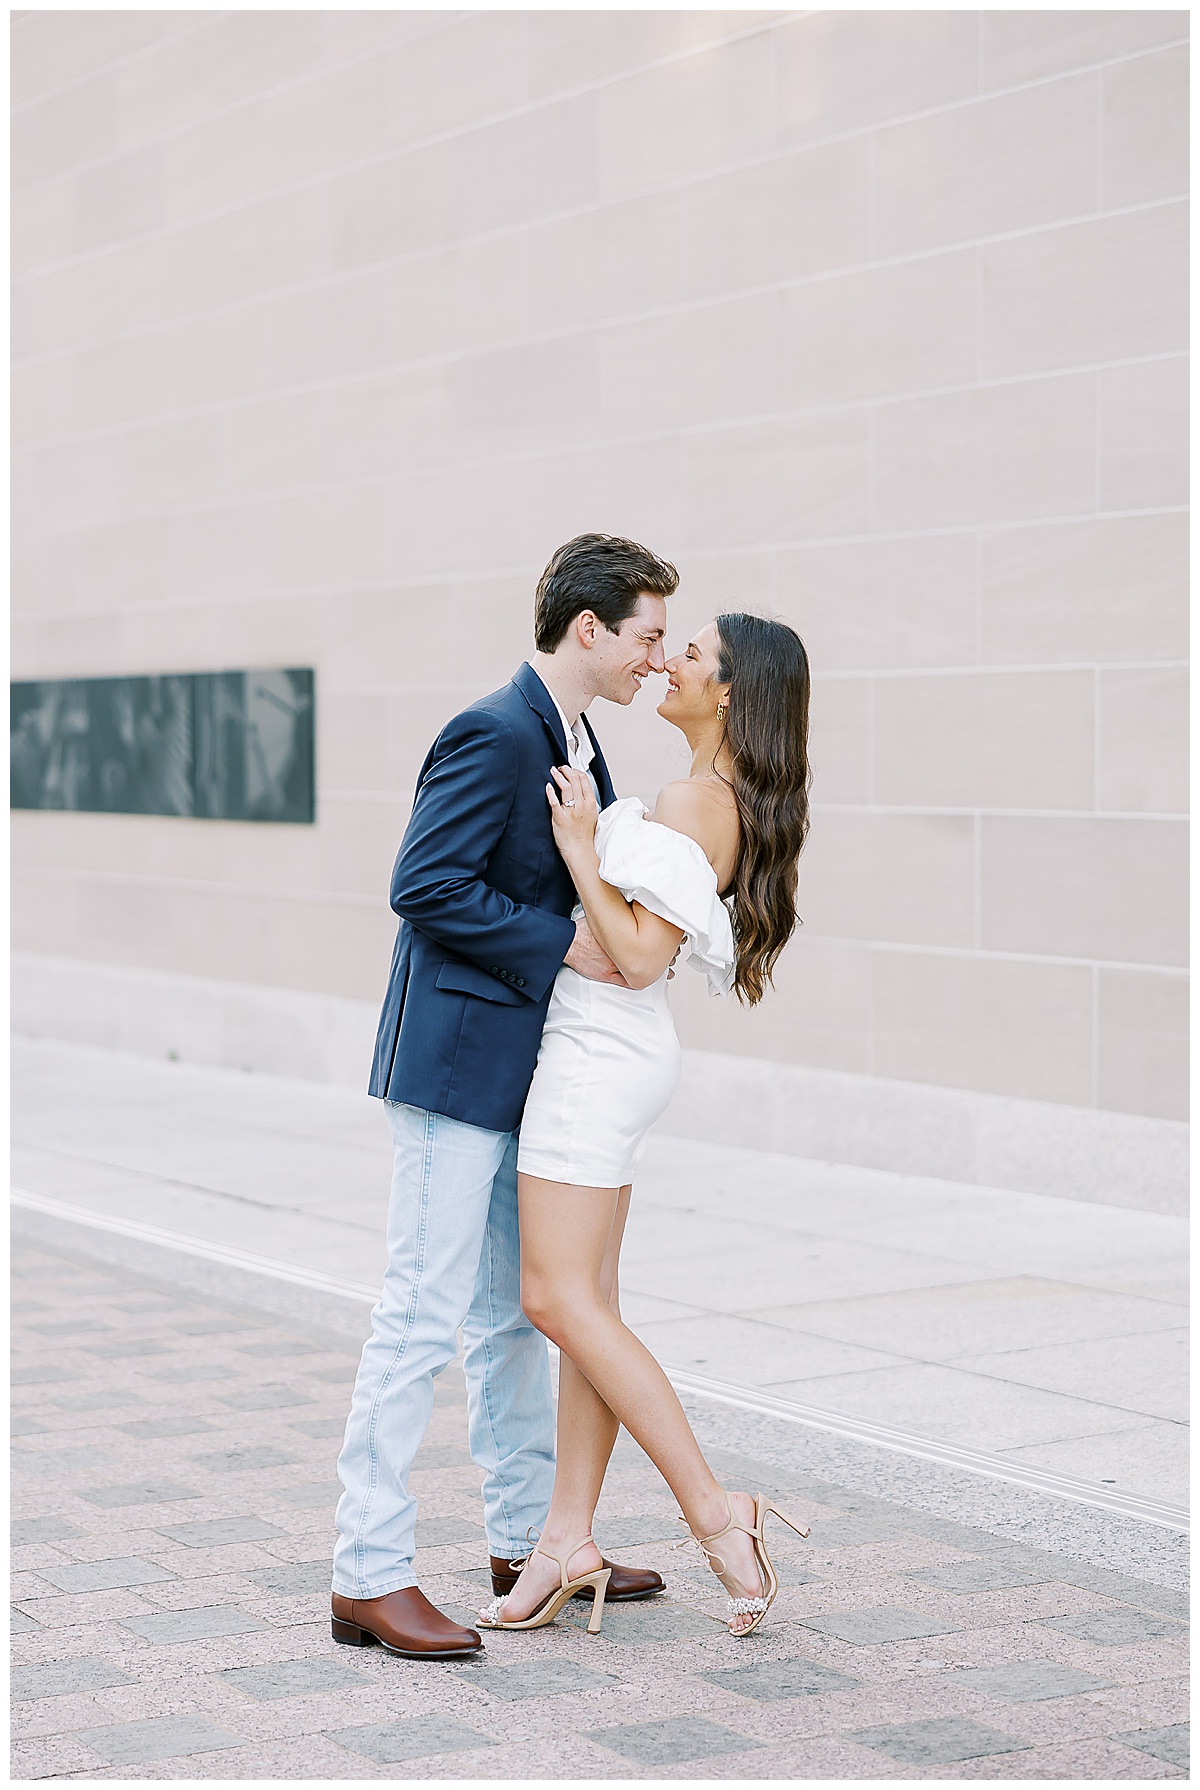 Abbie and Brandon's Dallas engagement session at Winspear Opera House.